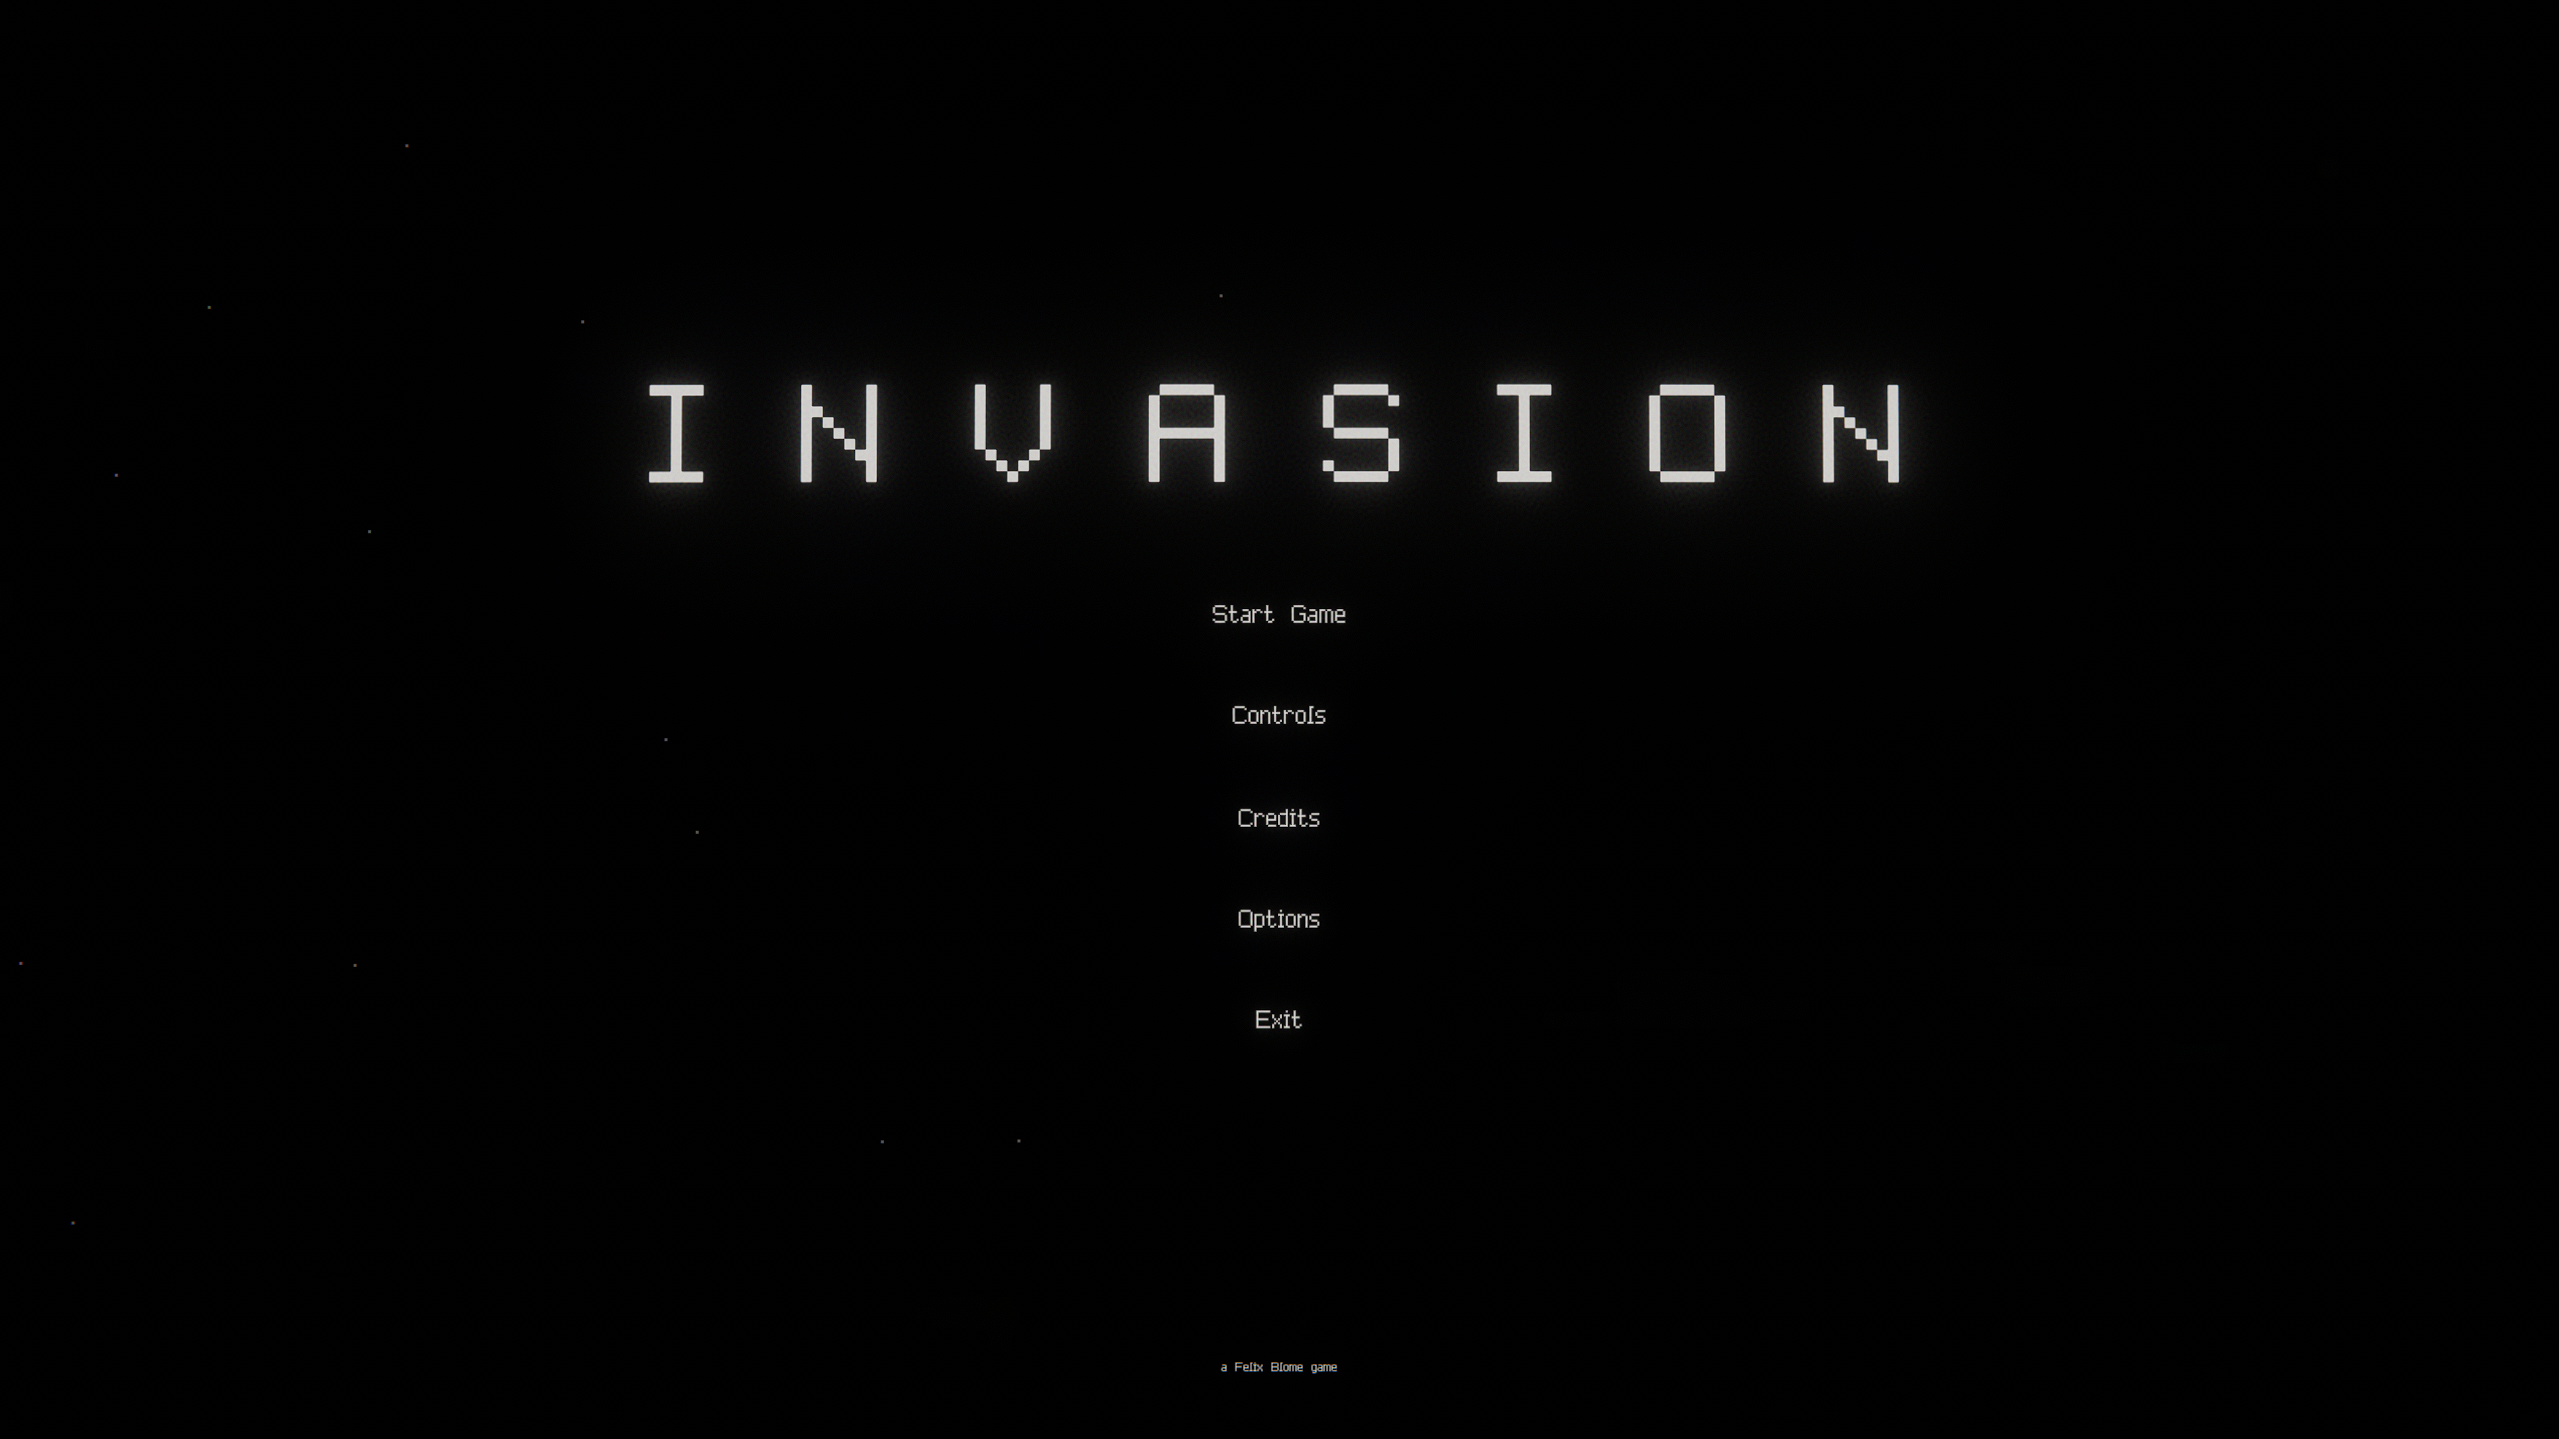 INVASION - a Space Invaders Tribute